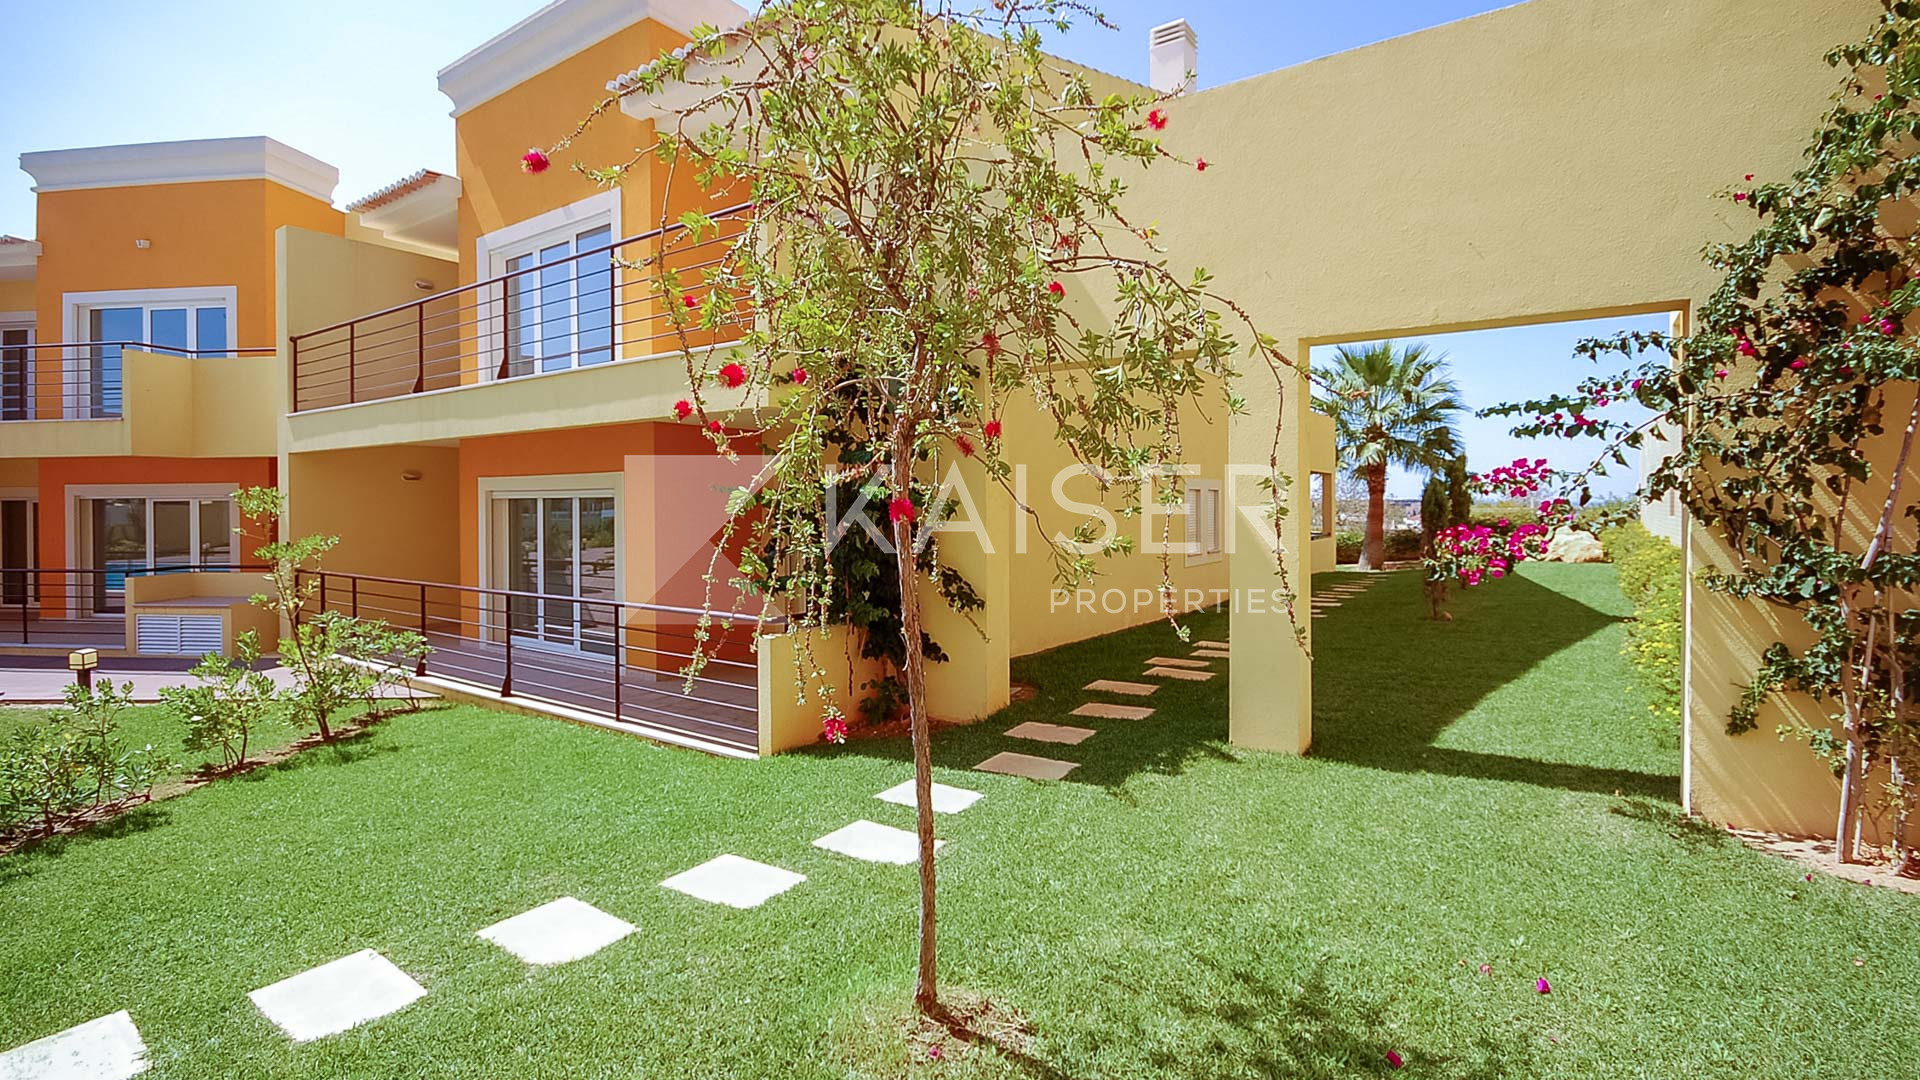 Apartment for sale in Albufeira 22